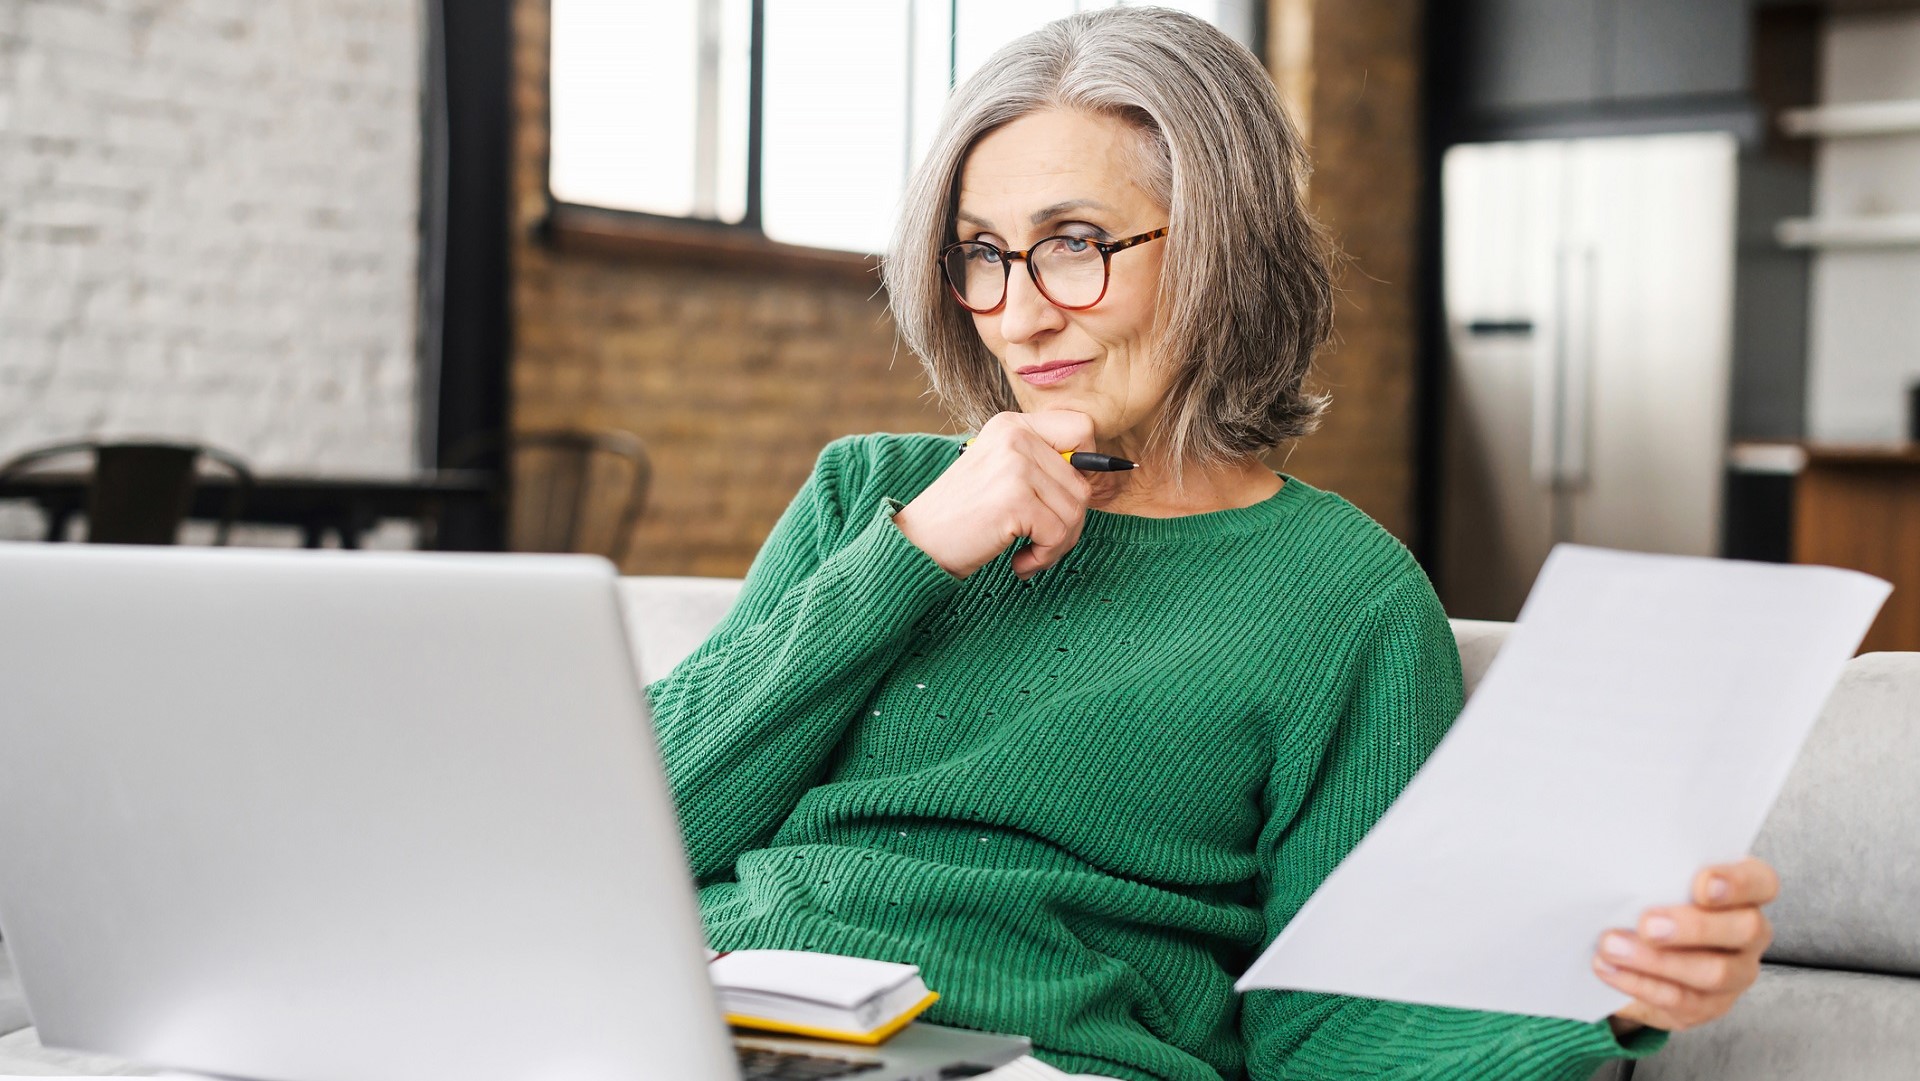 a woman with gray hair and glasses holds papers as she thinks about the information she's seeing on a laptop screen